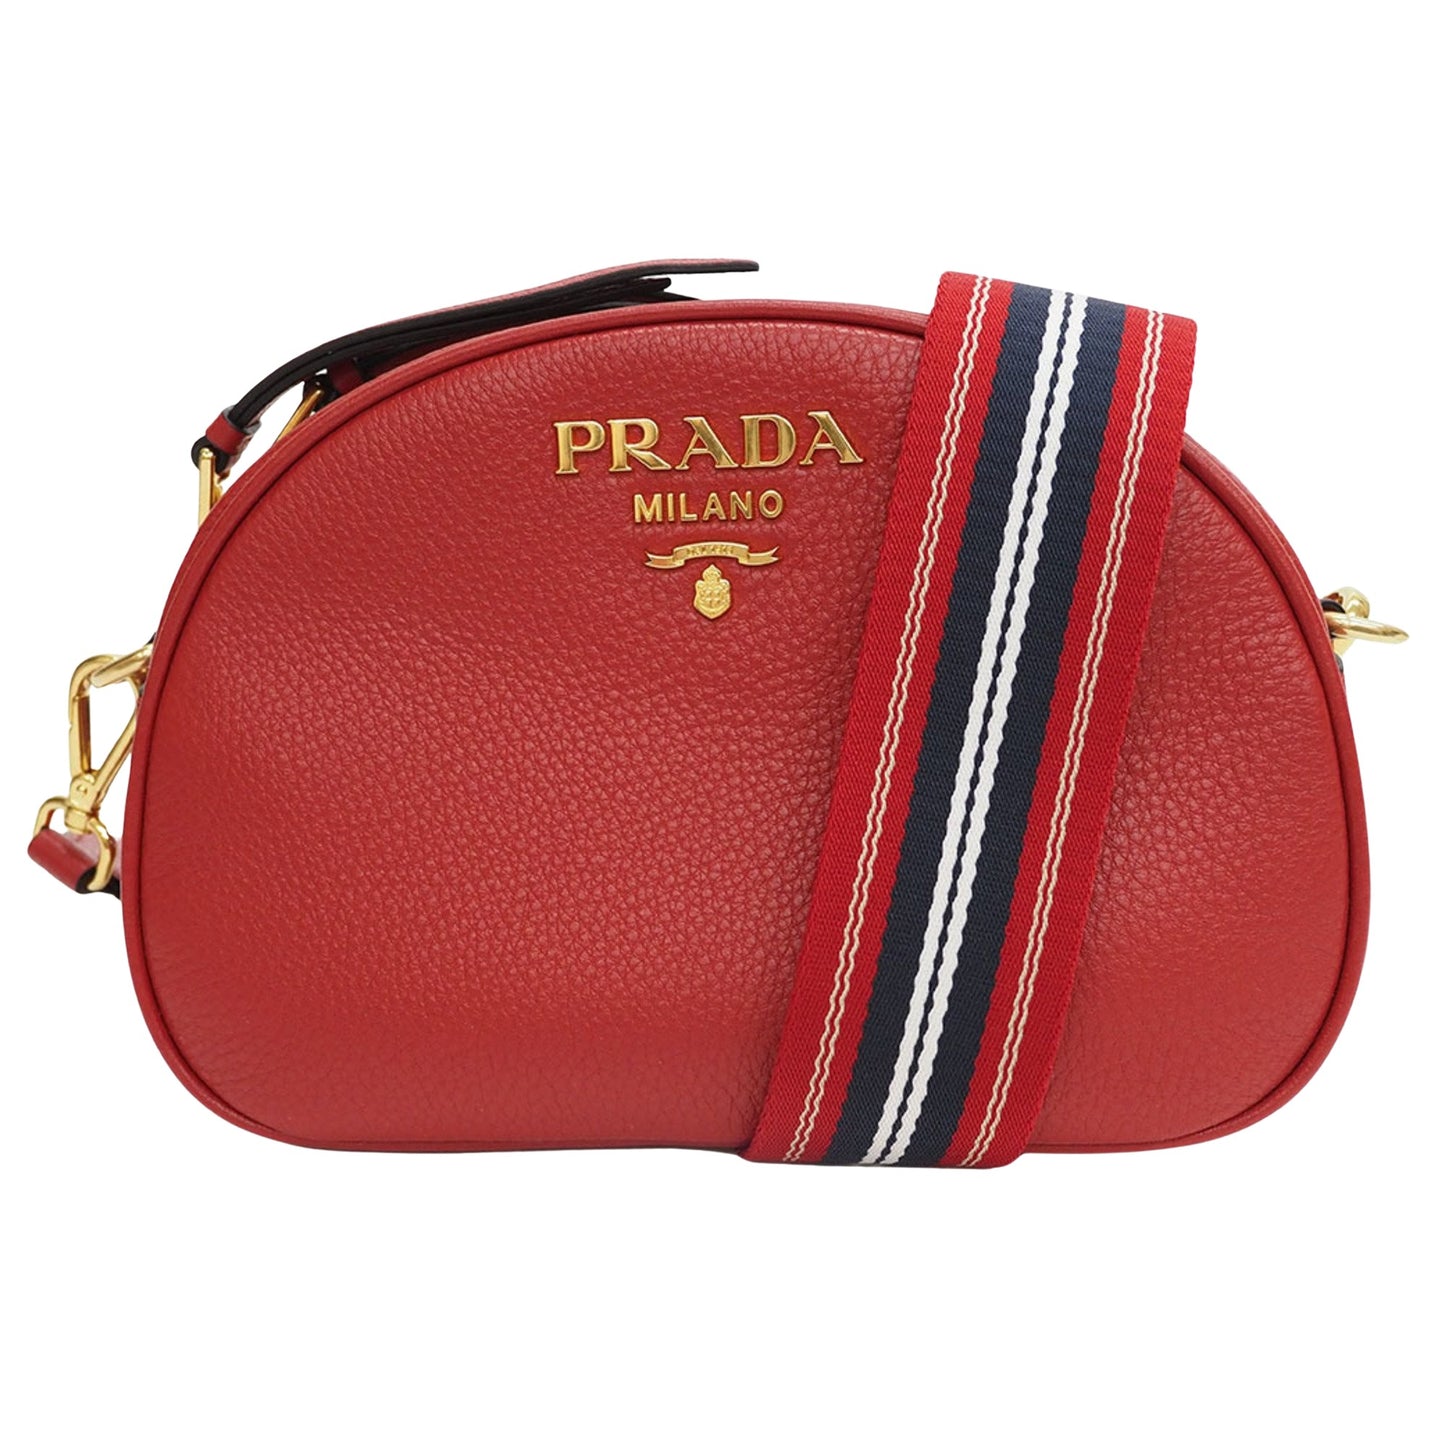 Prada Women's Luxurious Red Leather Shoulder Bag with Iconic Design by Italian Craftsmen in Red